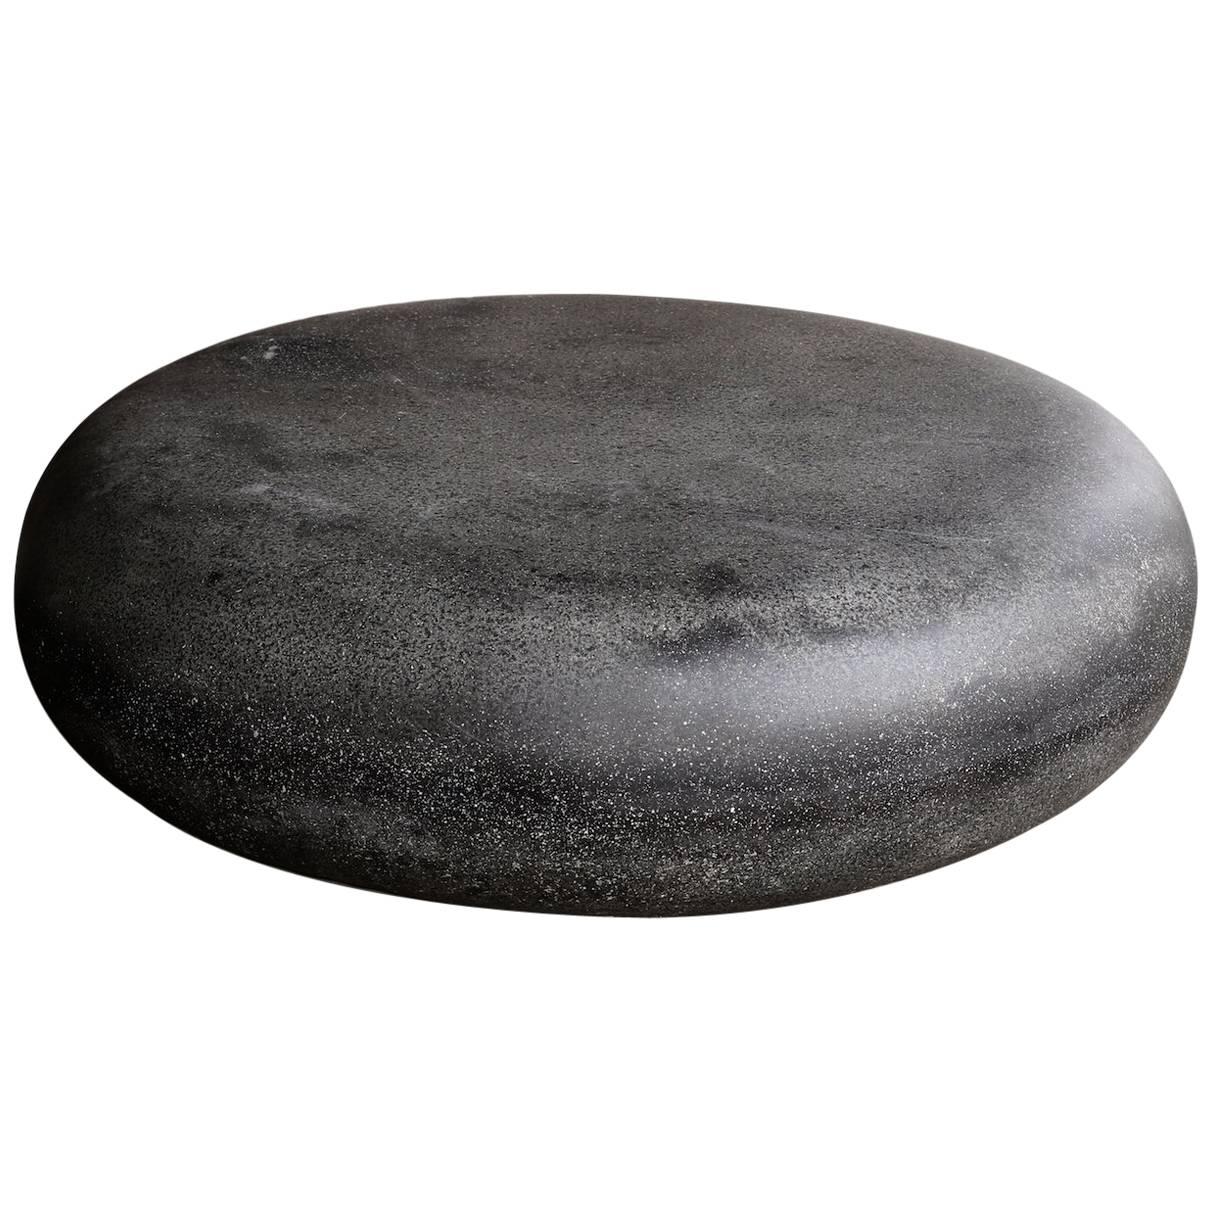 Cast Resin 'Pebble' Low Table, Coal Stone Finish by Zachary A. Design For Sale